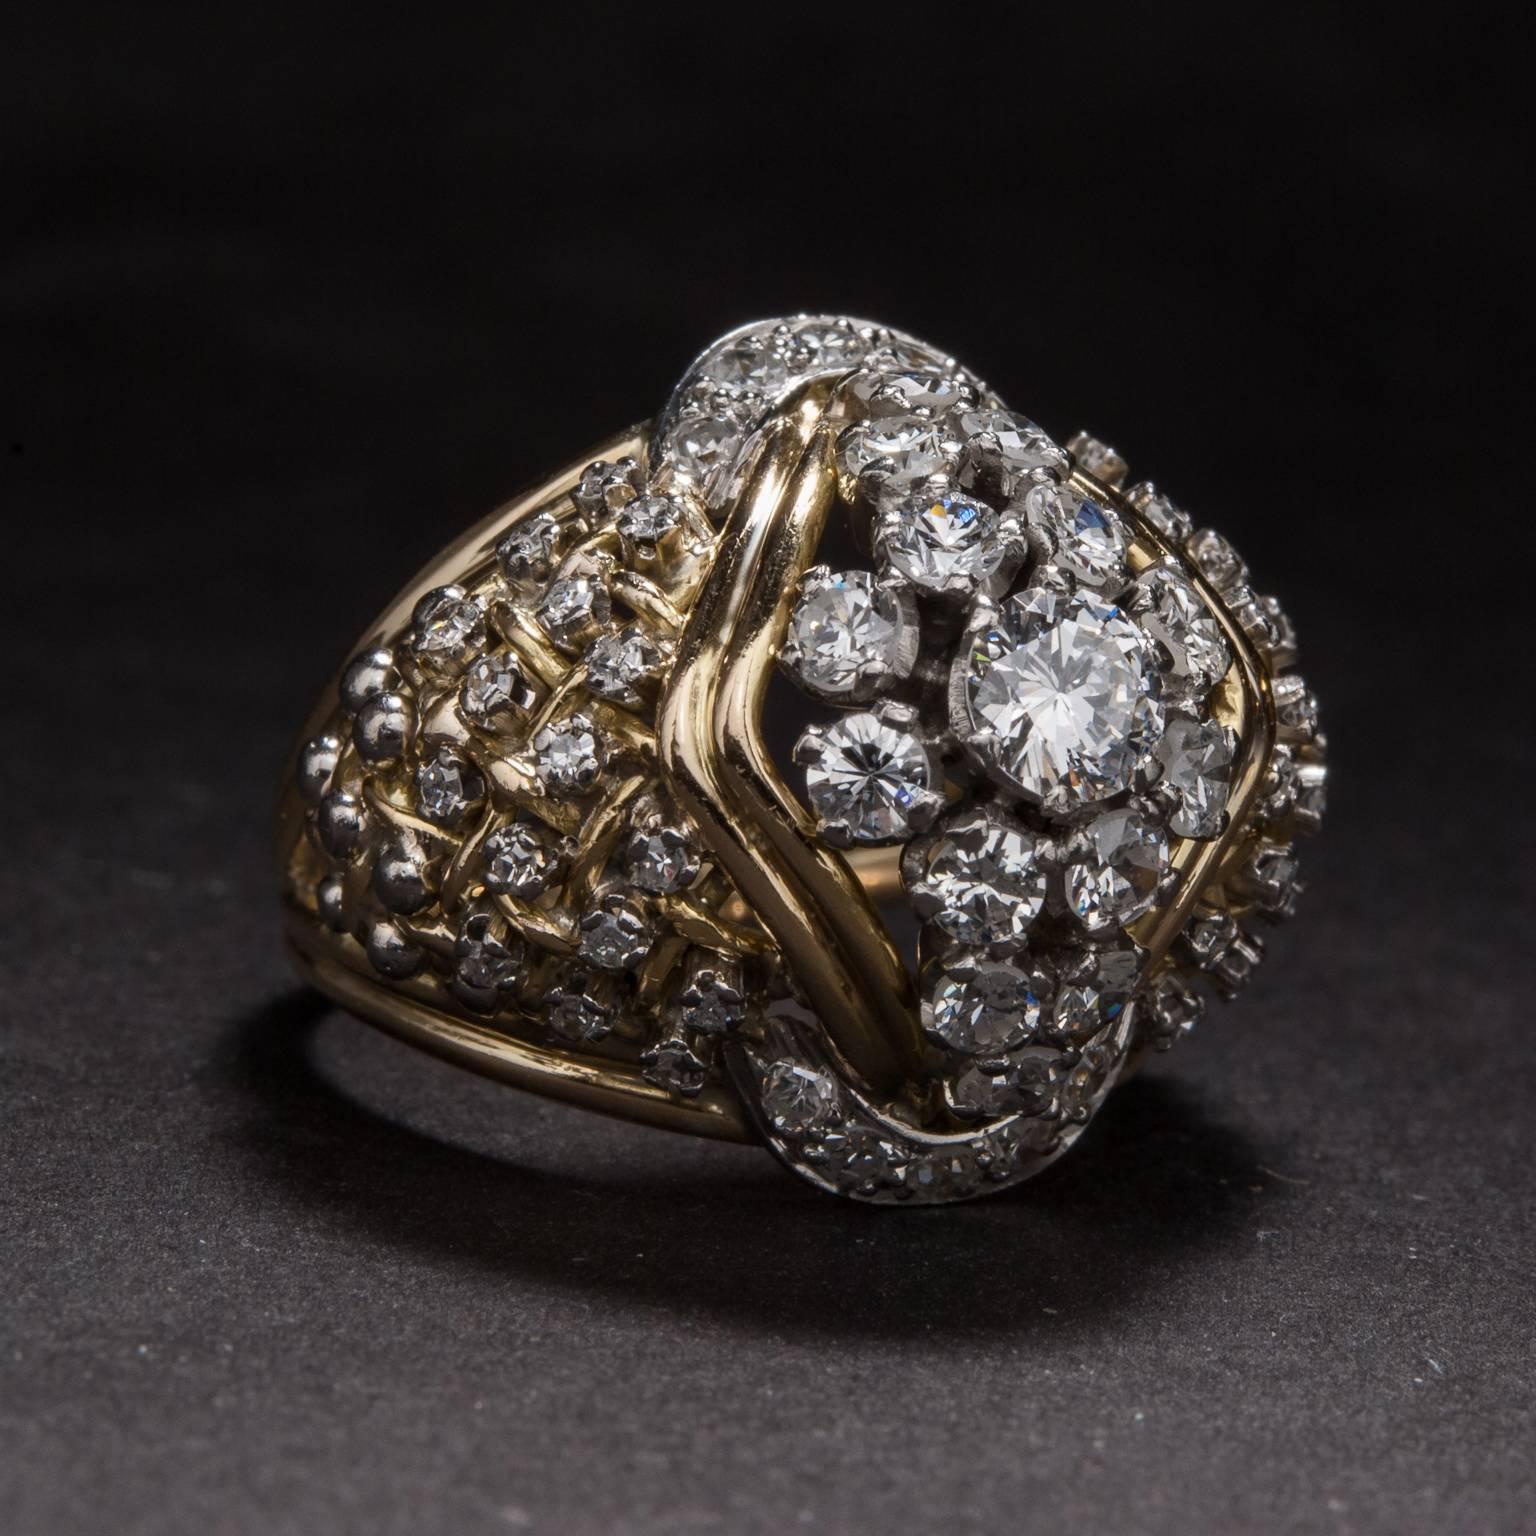 This extraordinary cluster diamond was hand-crafted circa 1940 in 18 karat white and yellow gold. The center diamond weighs .38 carats and it is surrounded by 1.75 total carats of accent diamonds. The head of the ring measures 19.75mm tall by 23mm